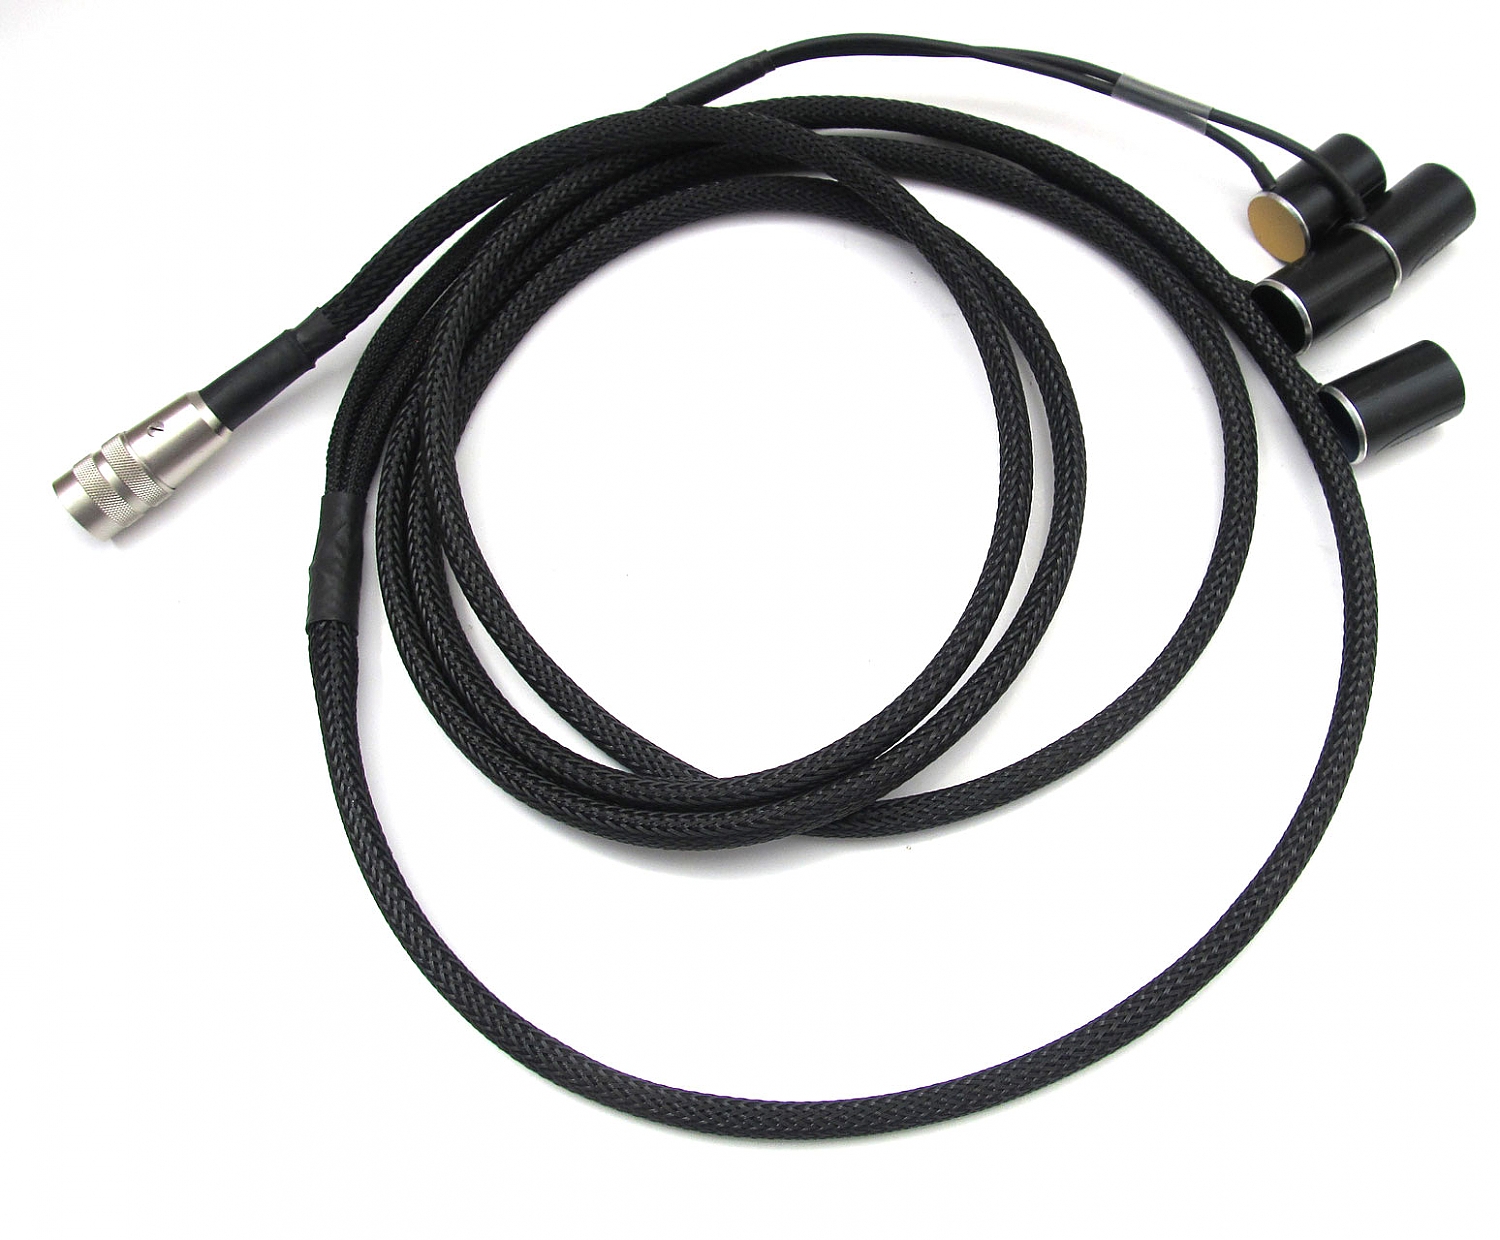 OPS - Sennheiser Ambeo breakout cable